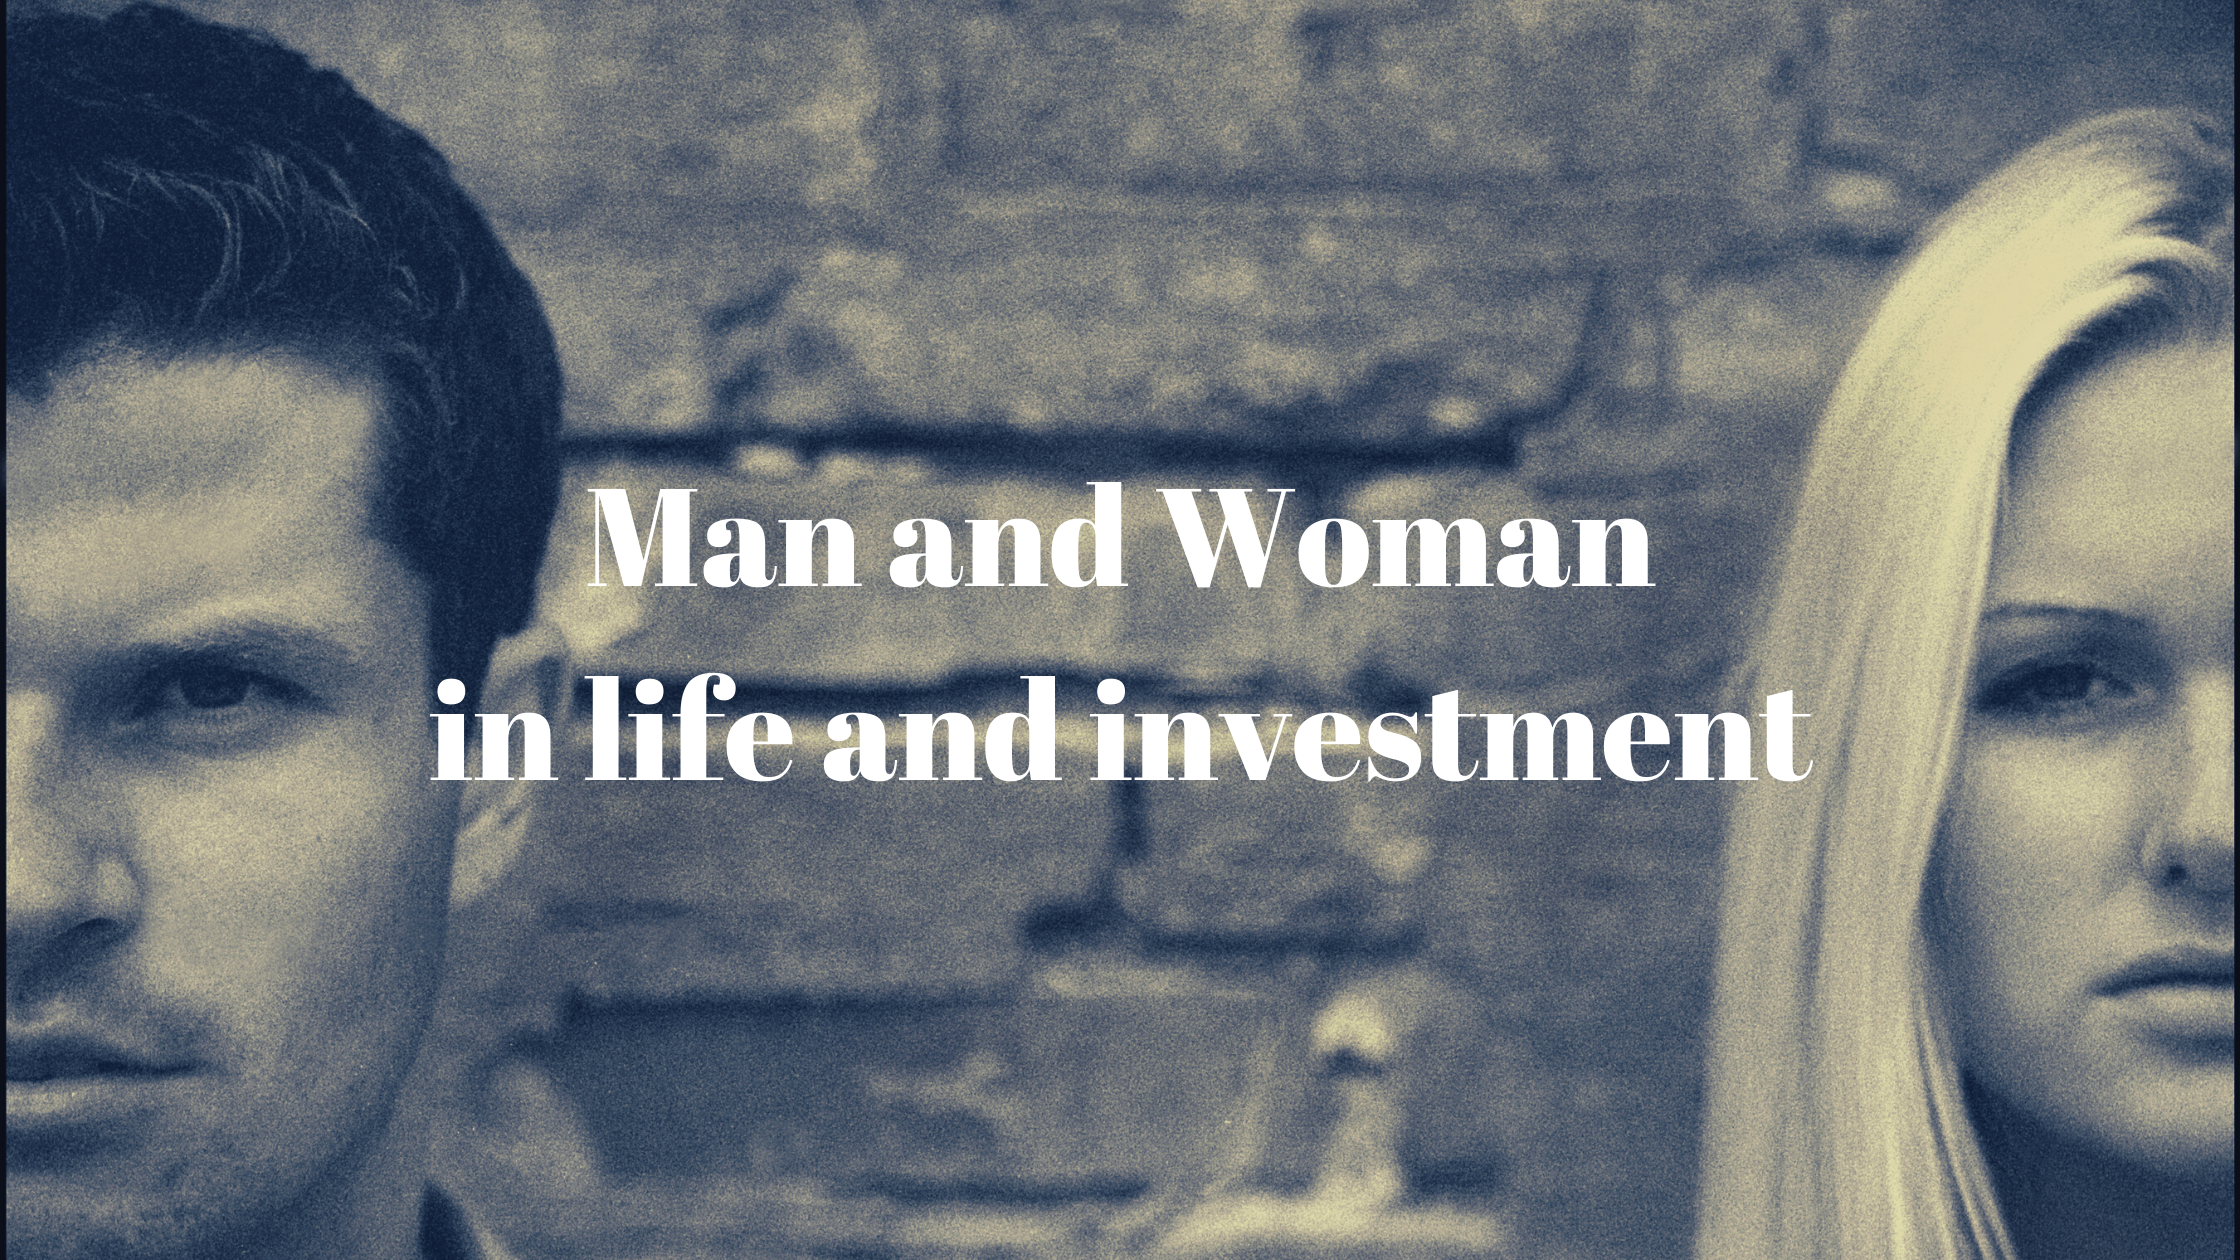 Man and Woman in life and investments